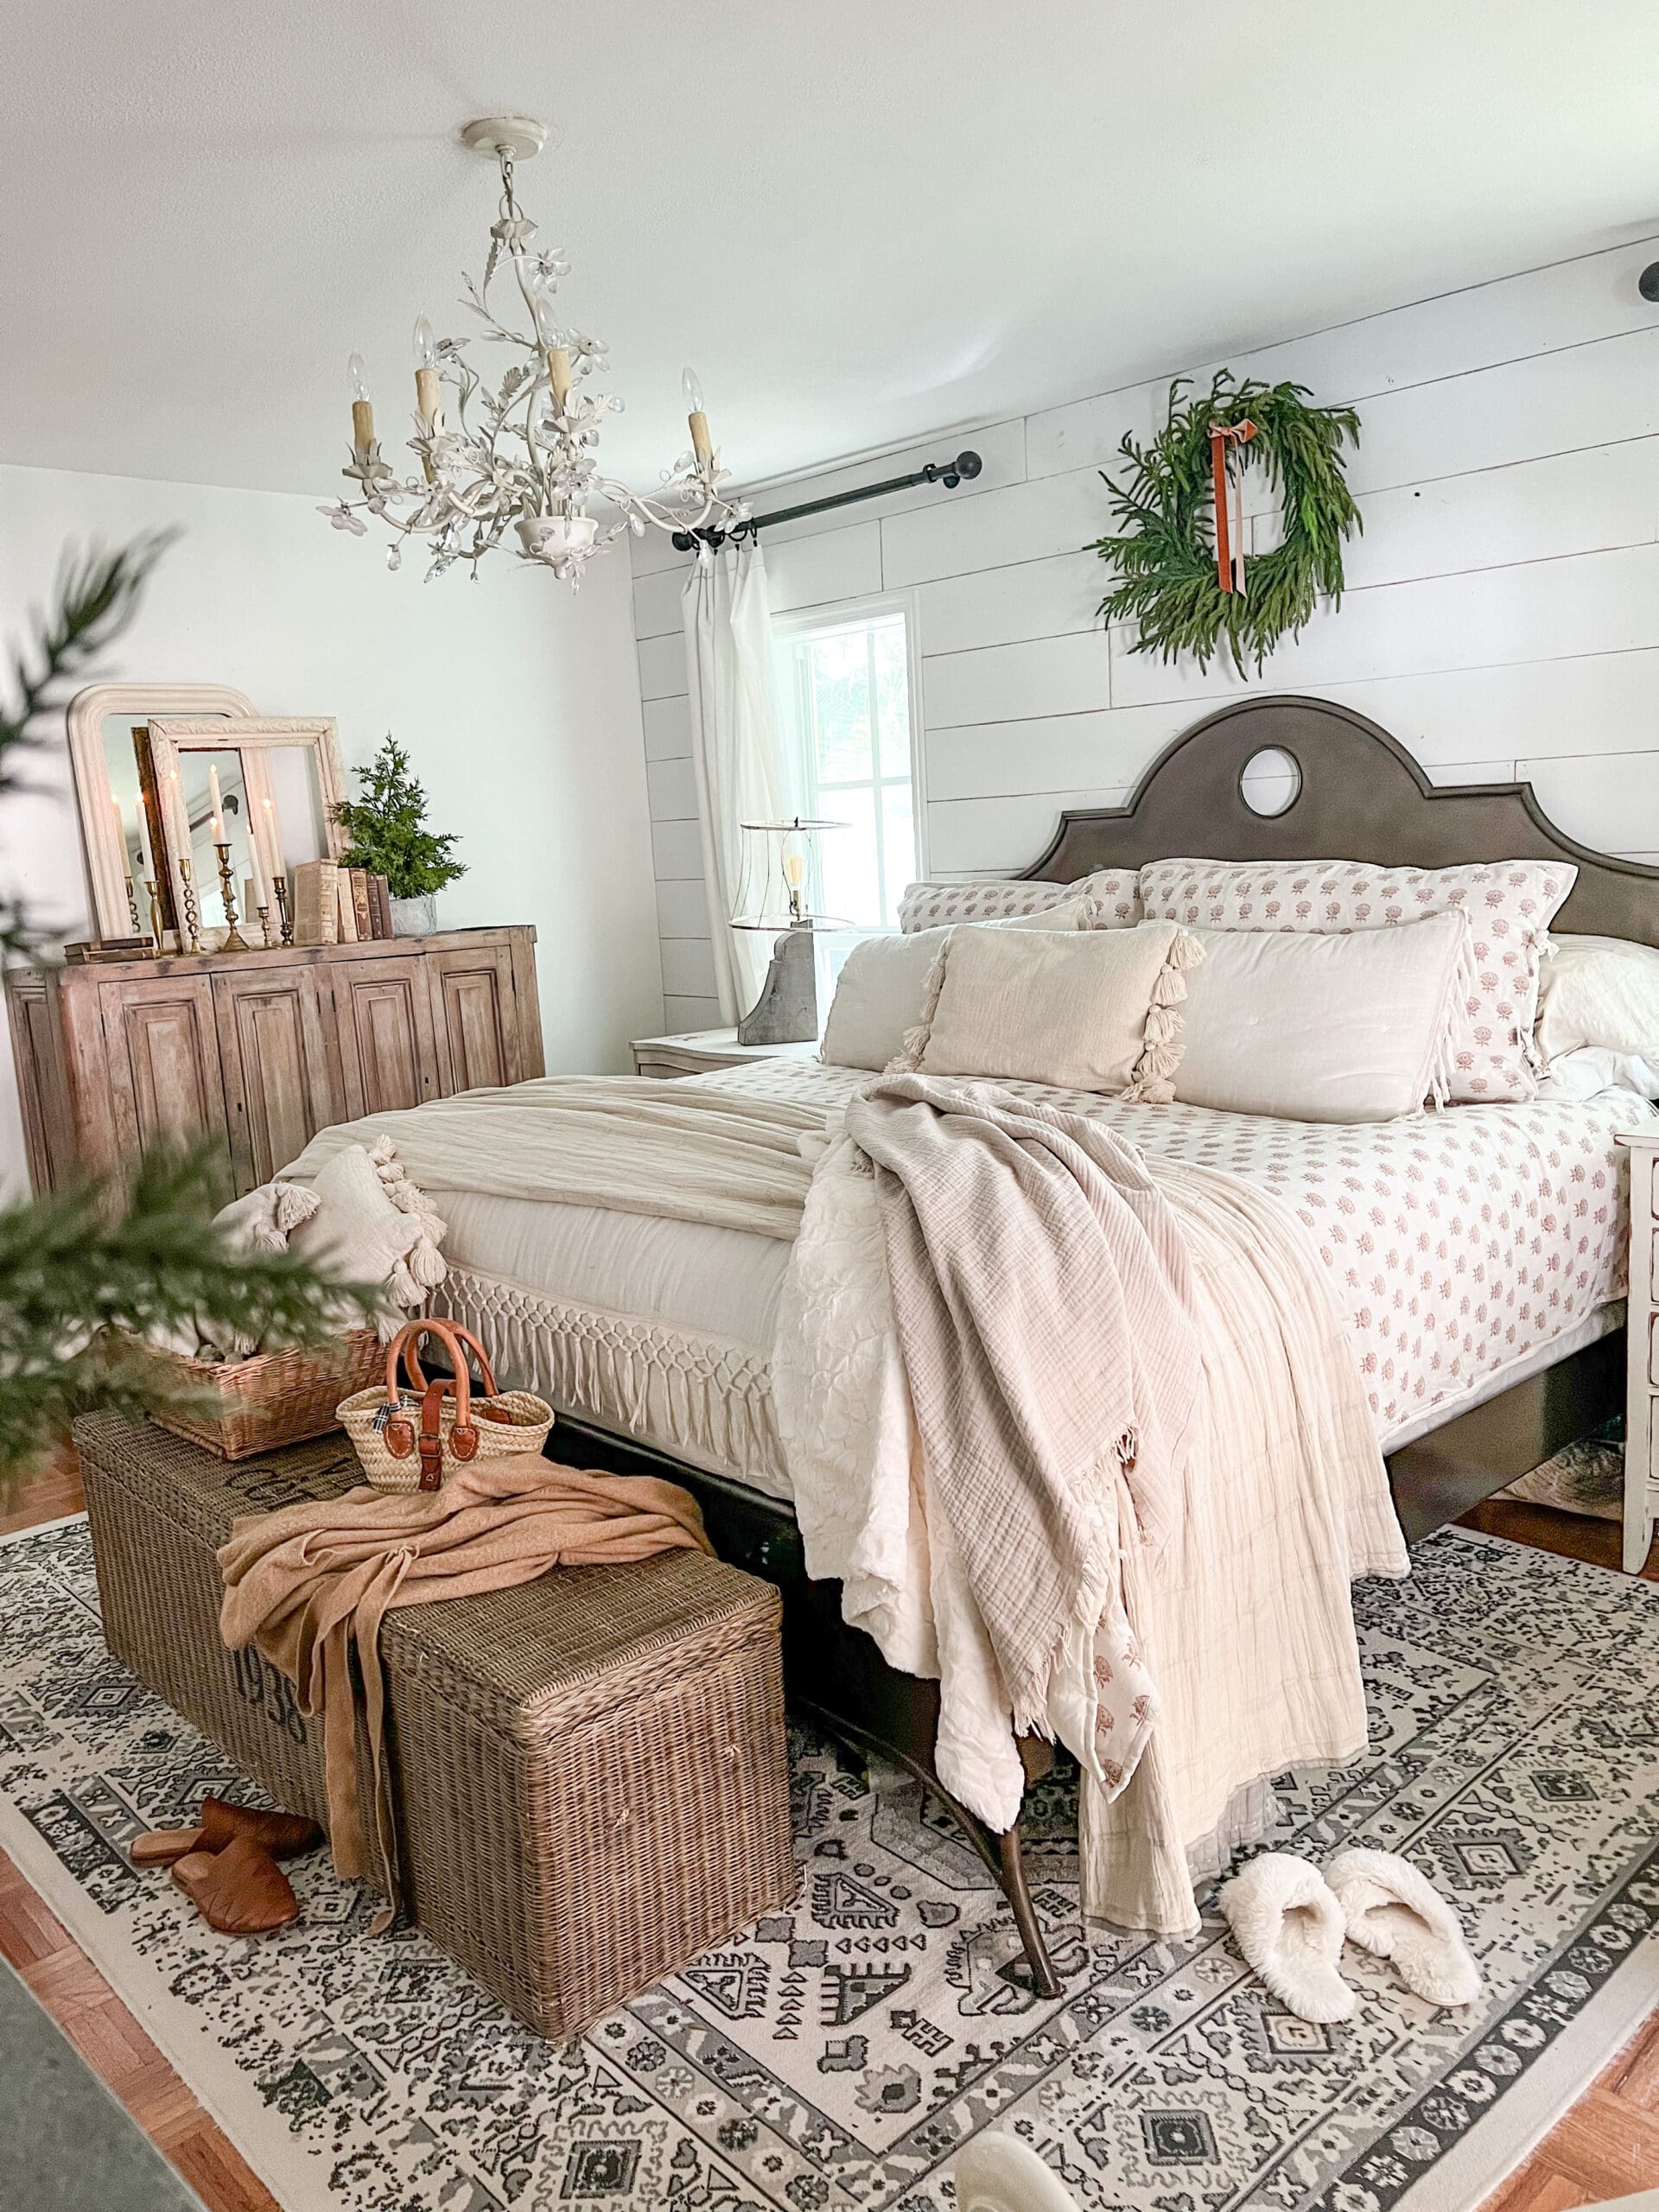 cozy bedroom styled with neutral bedding, a large weaved basket and a throw blanket on top, and a small wreath above the bed